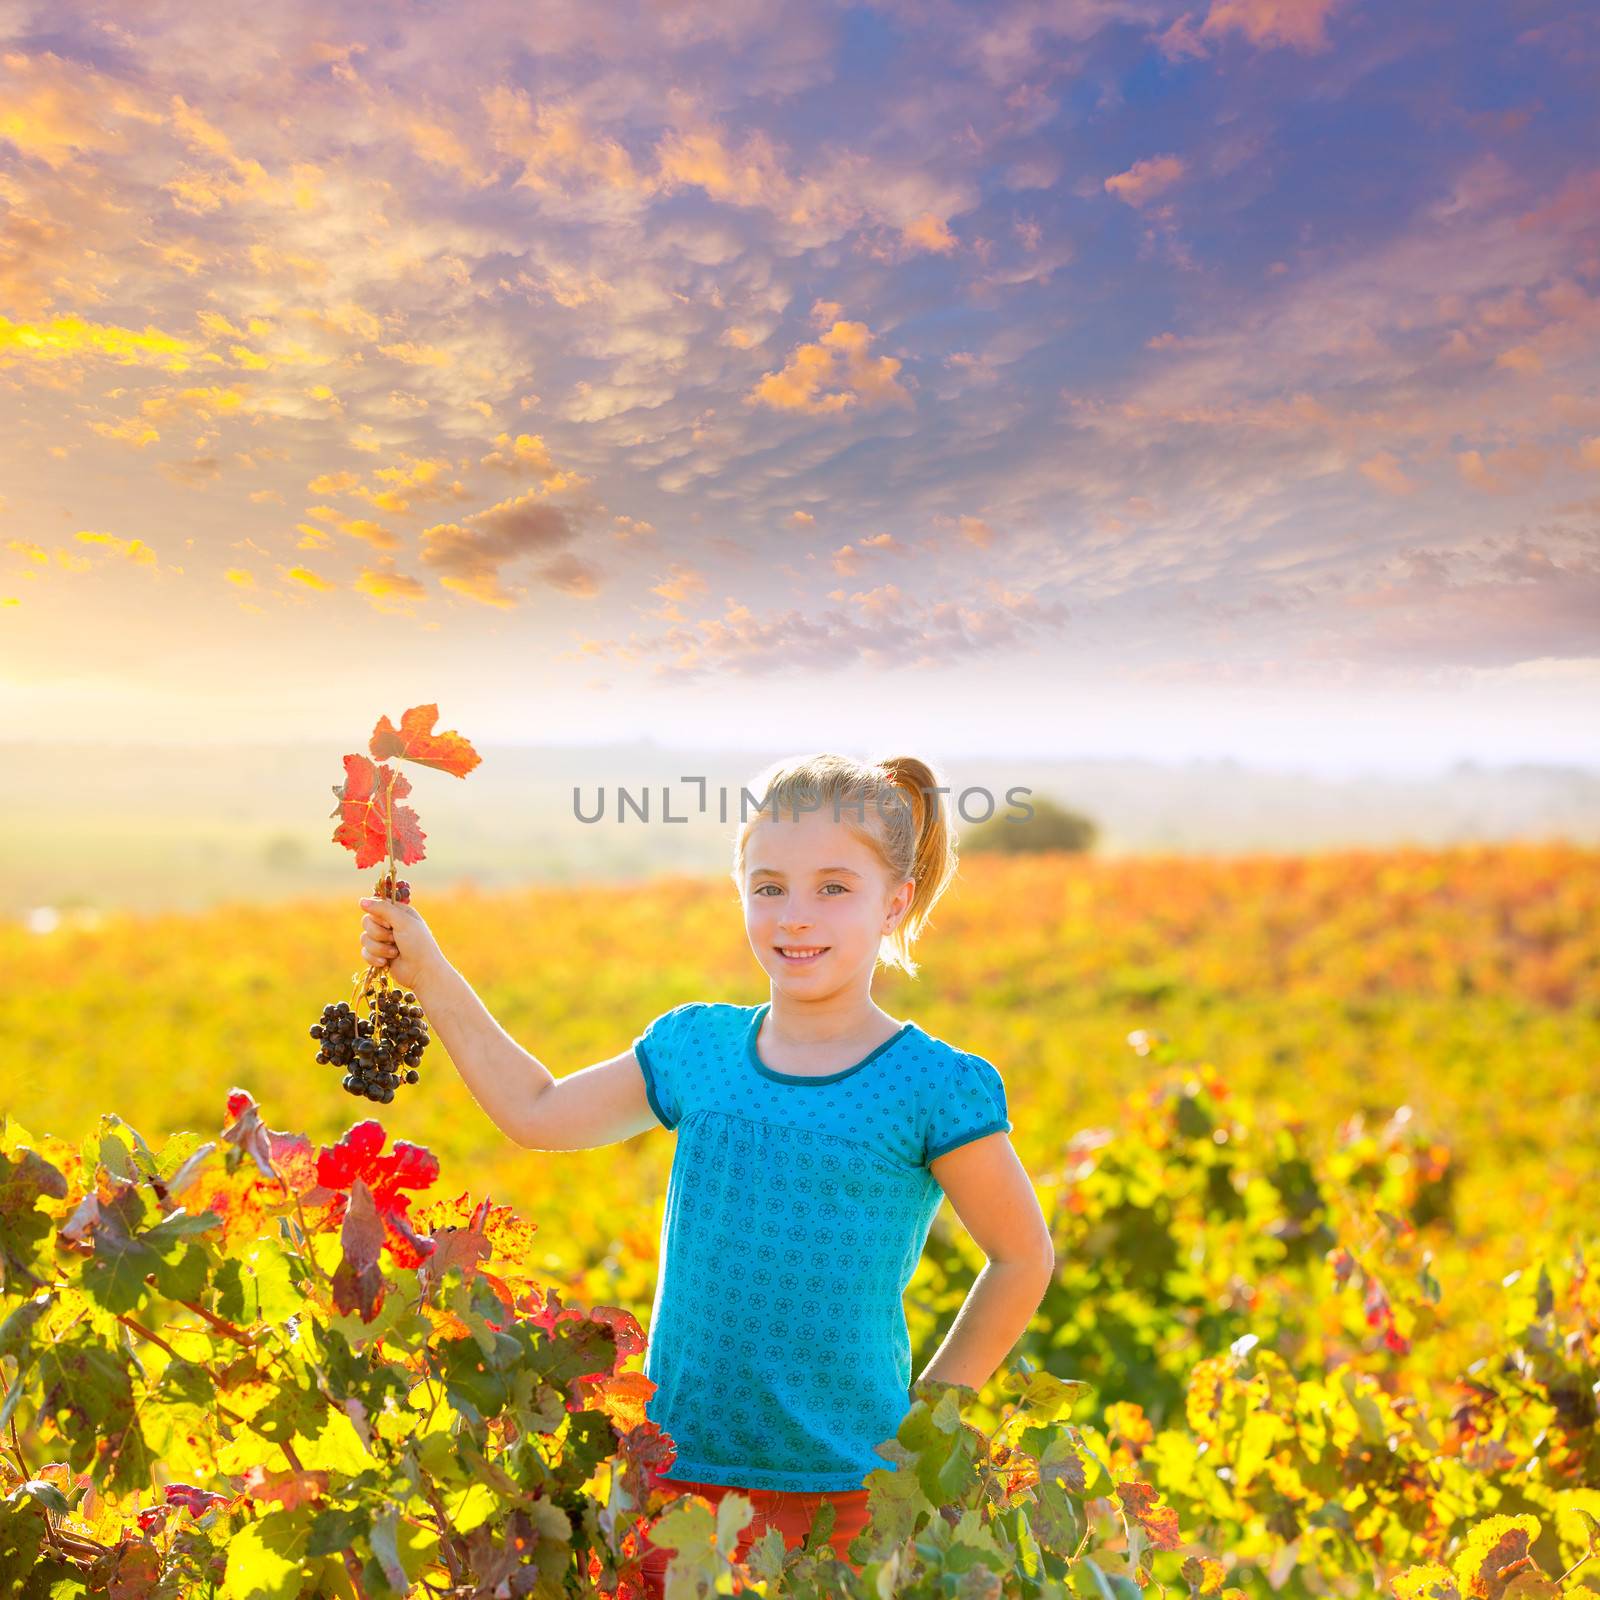 Kid girl in autumn vineyard field holding red grapes bunch by lunamarina